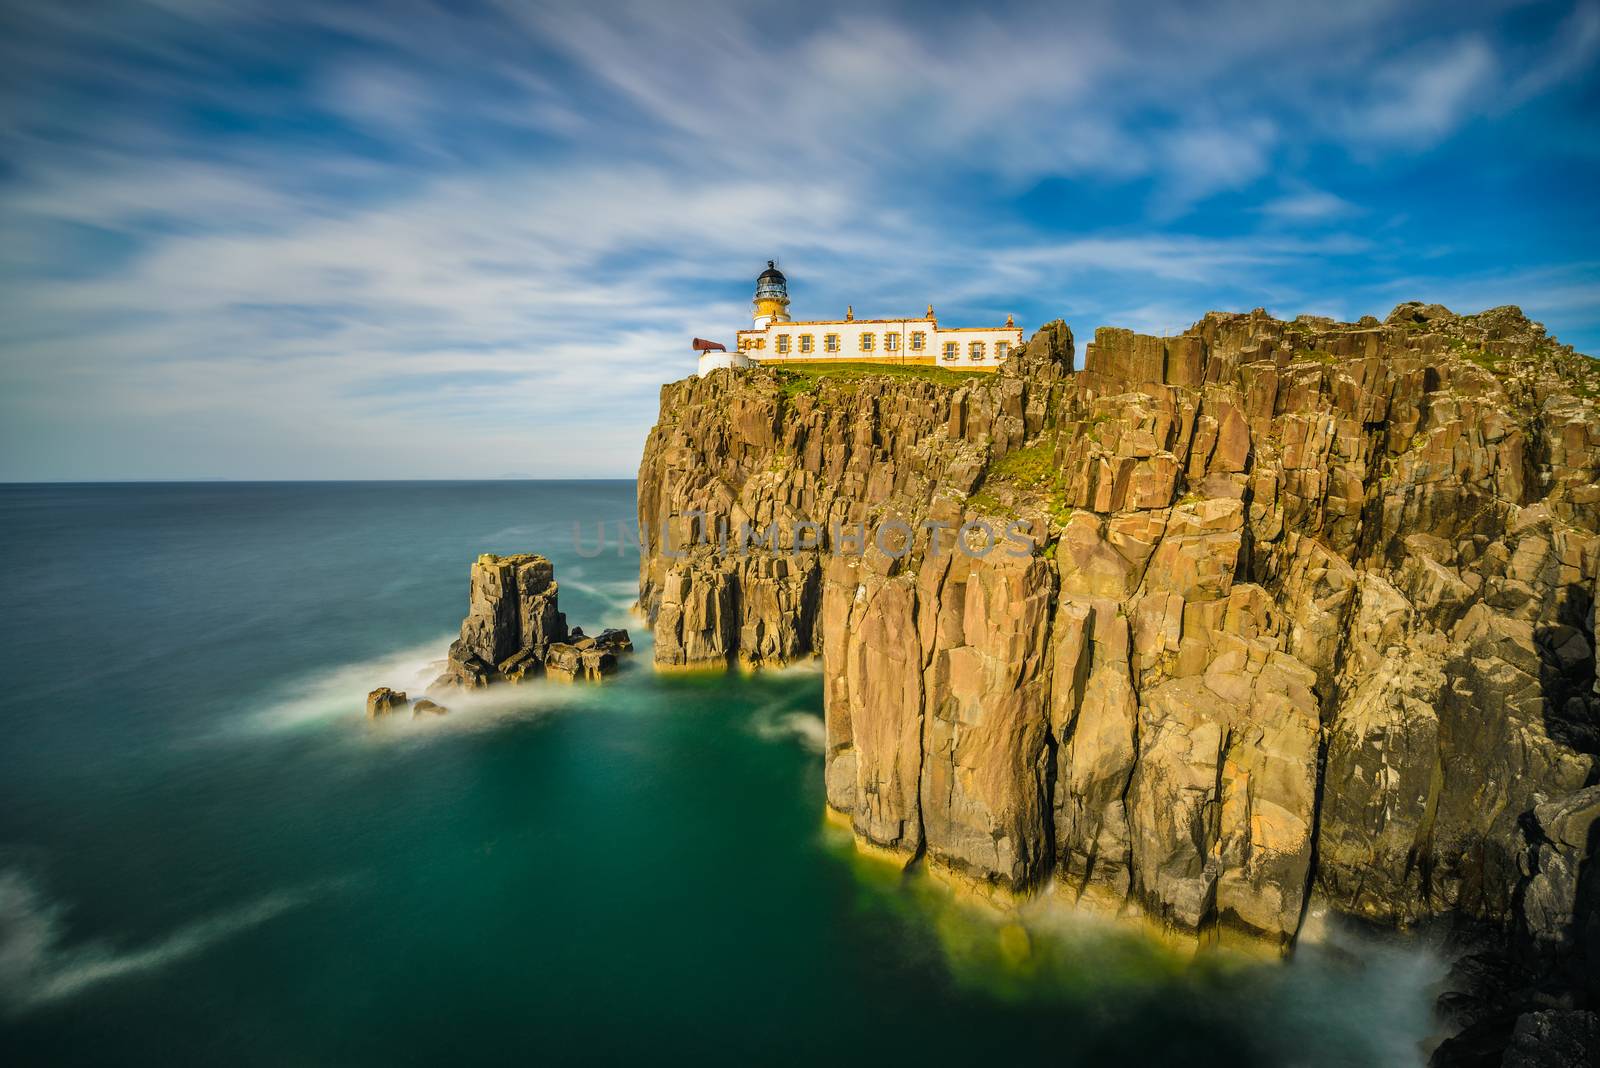 Neist Point lighthouse at Isle of Skye in Scotland by nickfox